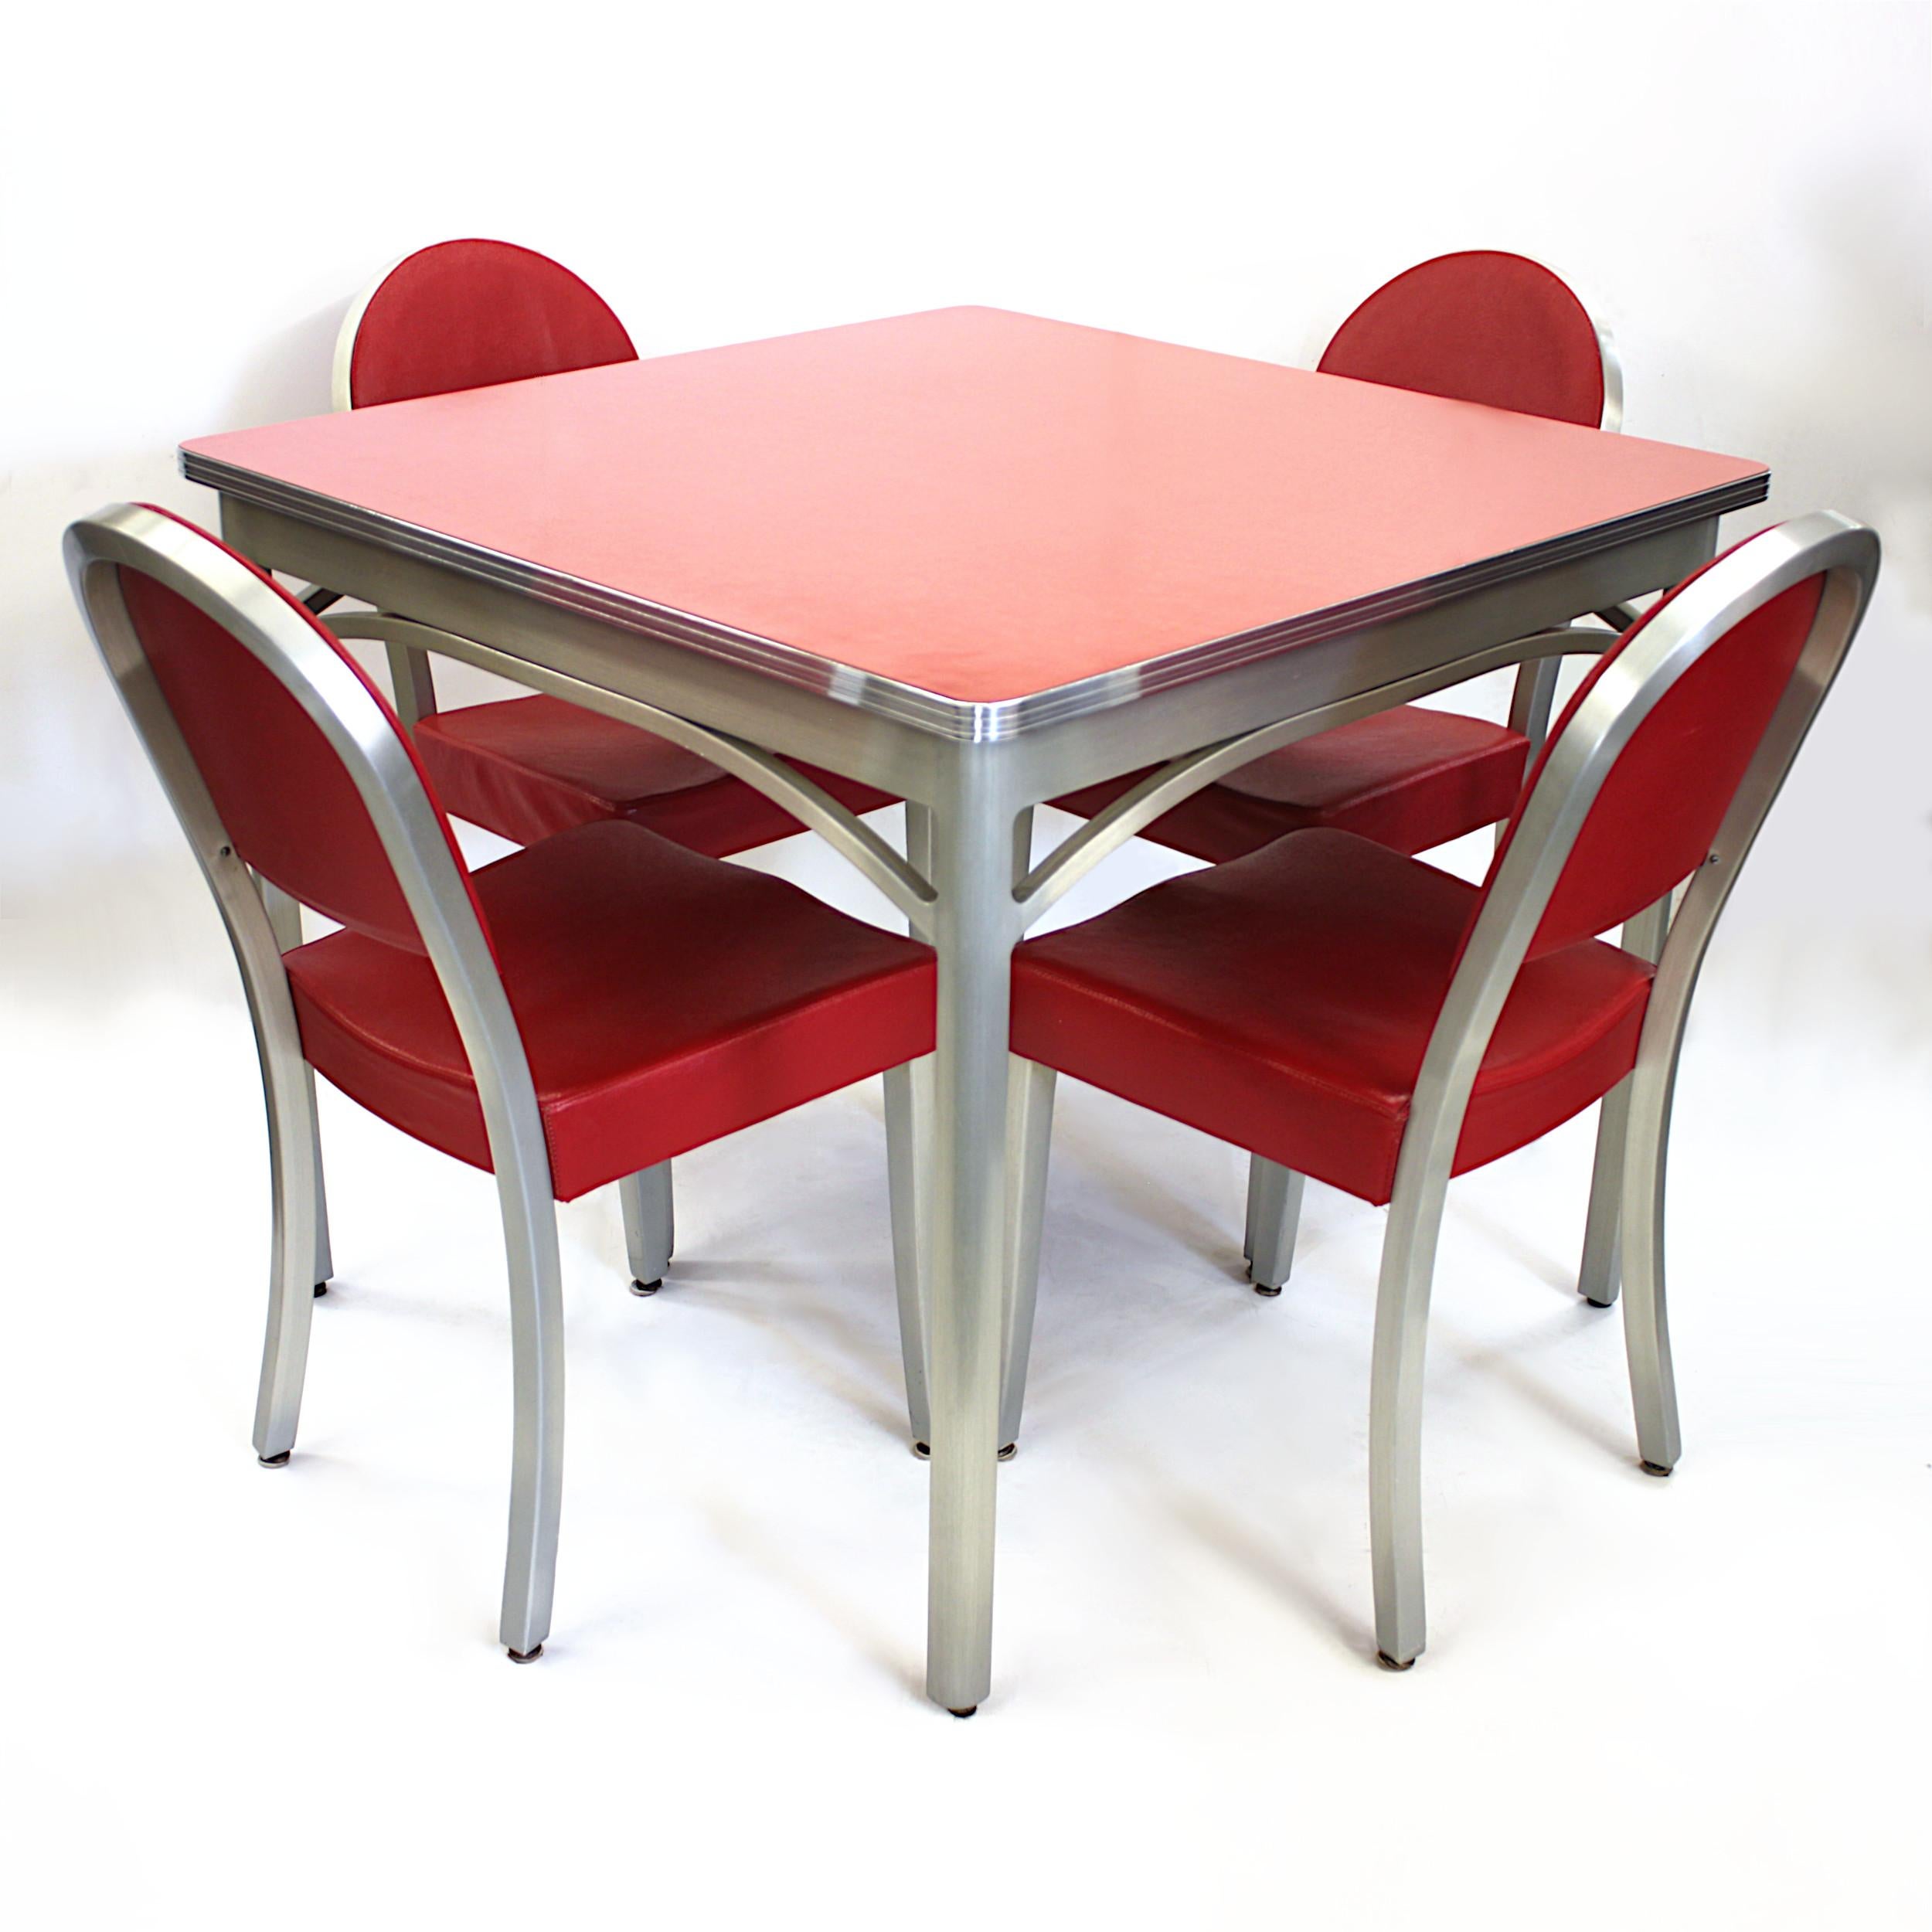 Vintage 1940s cafe table and chairs set by GoodForm Furniture Co., a division of The Gernal Fireproofing Co. 

Set features:

- Welded, brushed-aluminum frames
- Red Formica table-top
- Red vinyl upholstery
- 4 chairs

Dimensions:

Table: